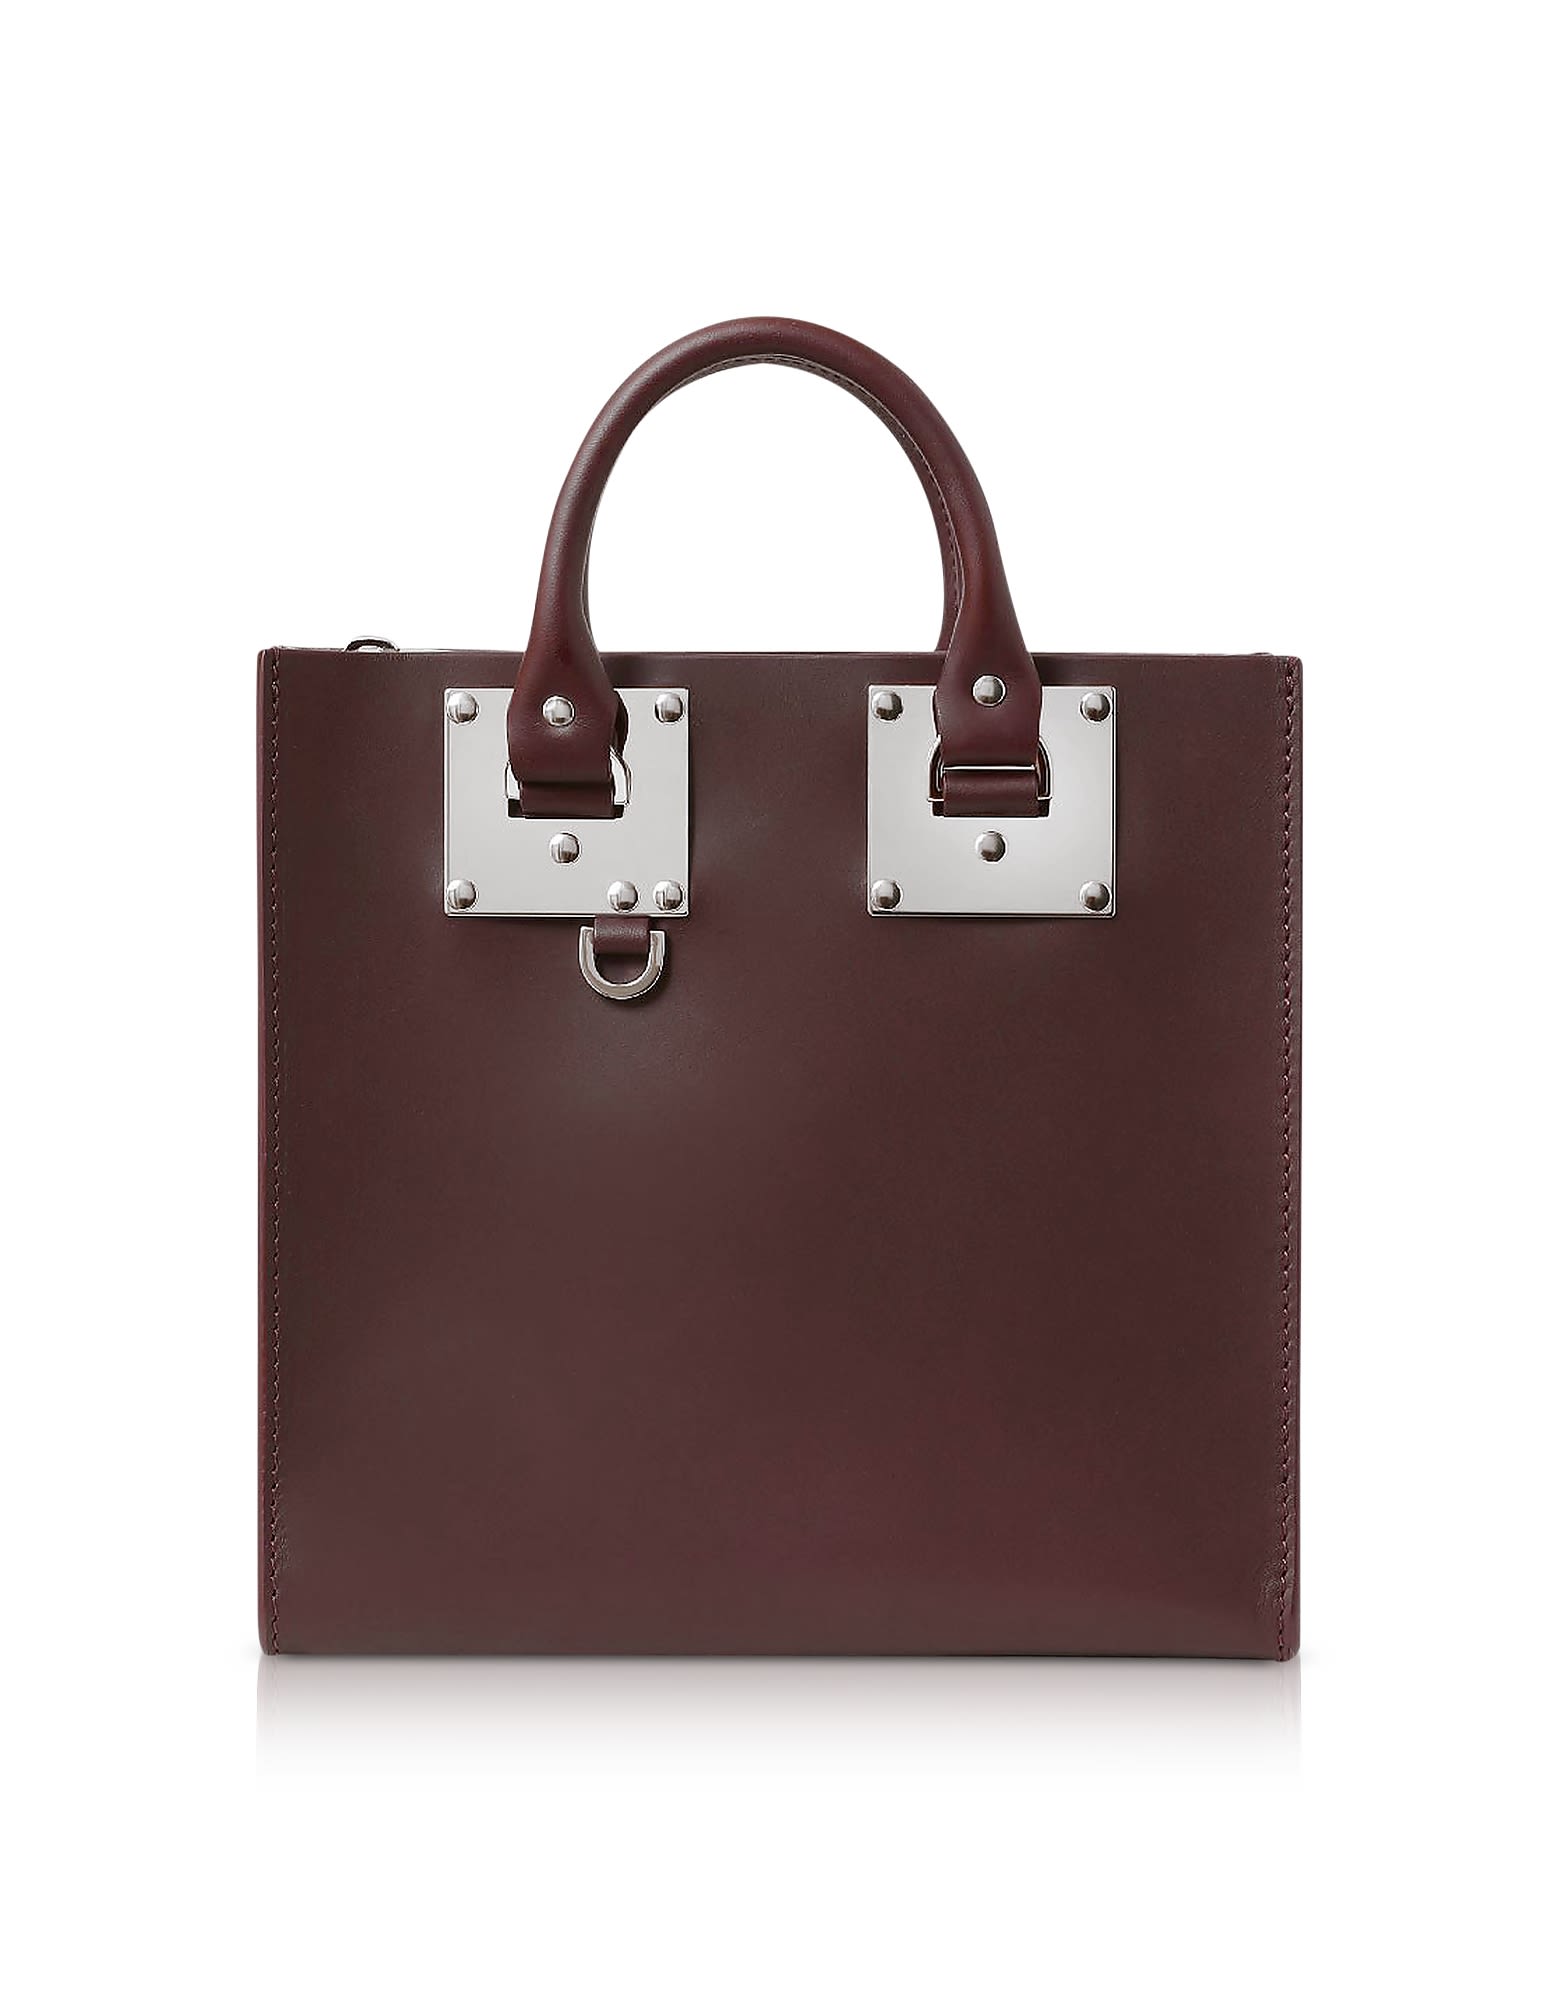 Sophie Hulme OXBLOOD SADDLE LEATHER SQUARE ALBION TOTE